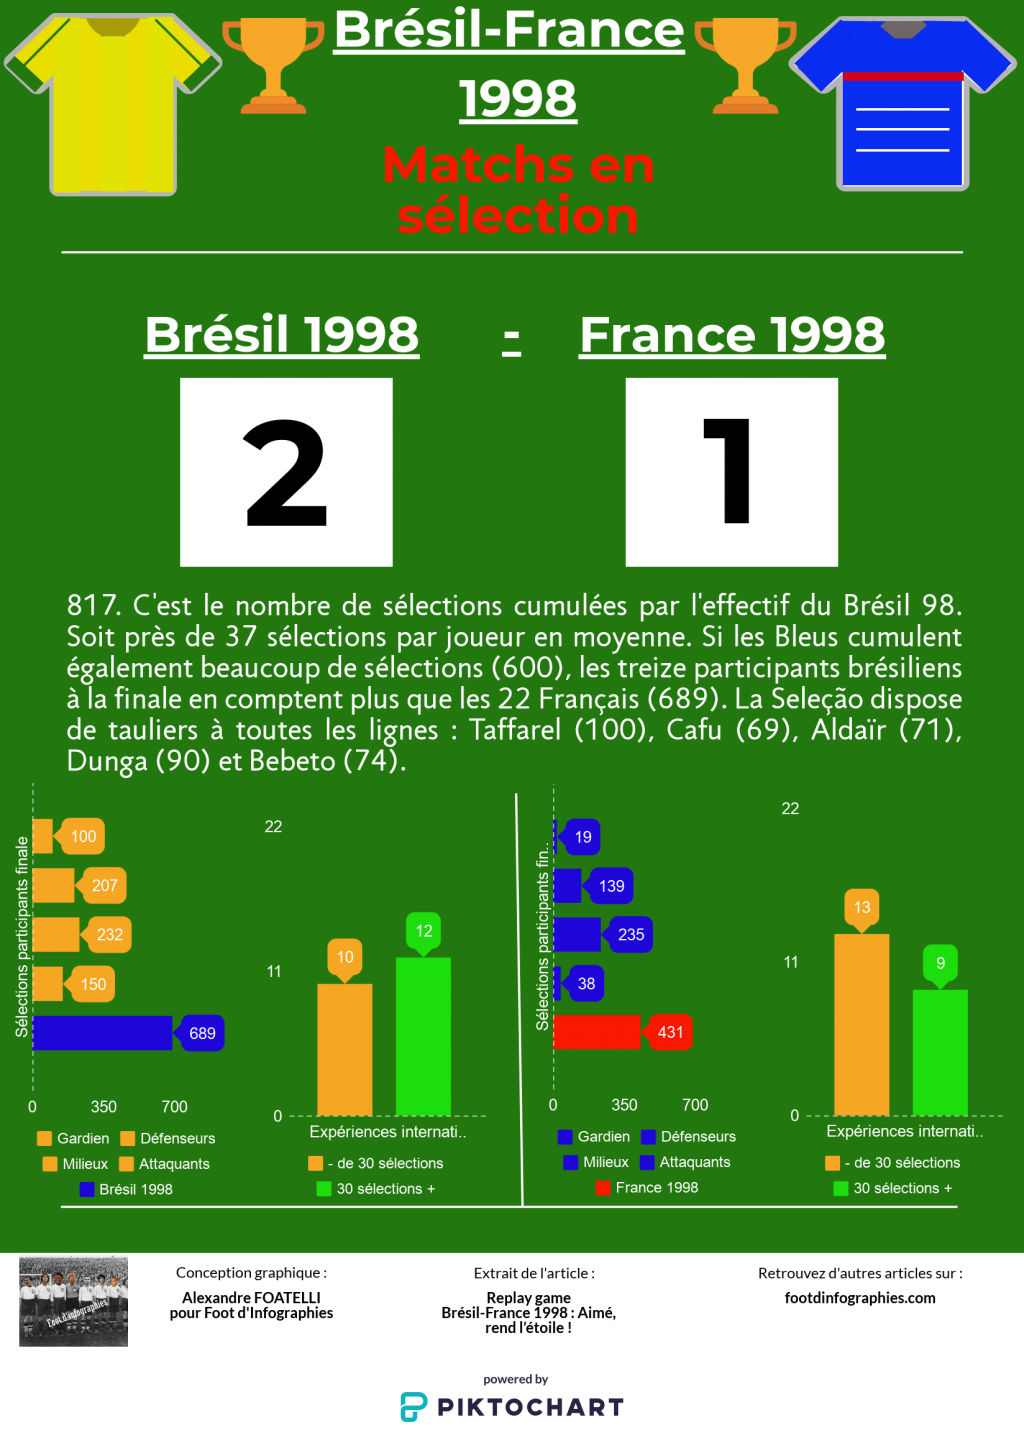 replay-game-bresil-france-1998-matchs-en-sélection-foot-dinfographies